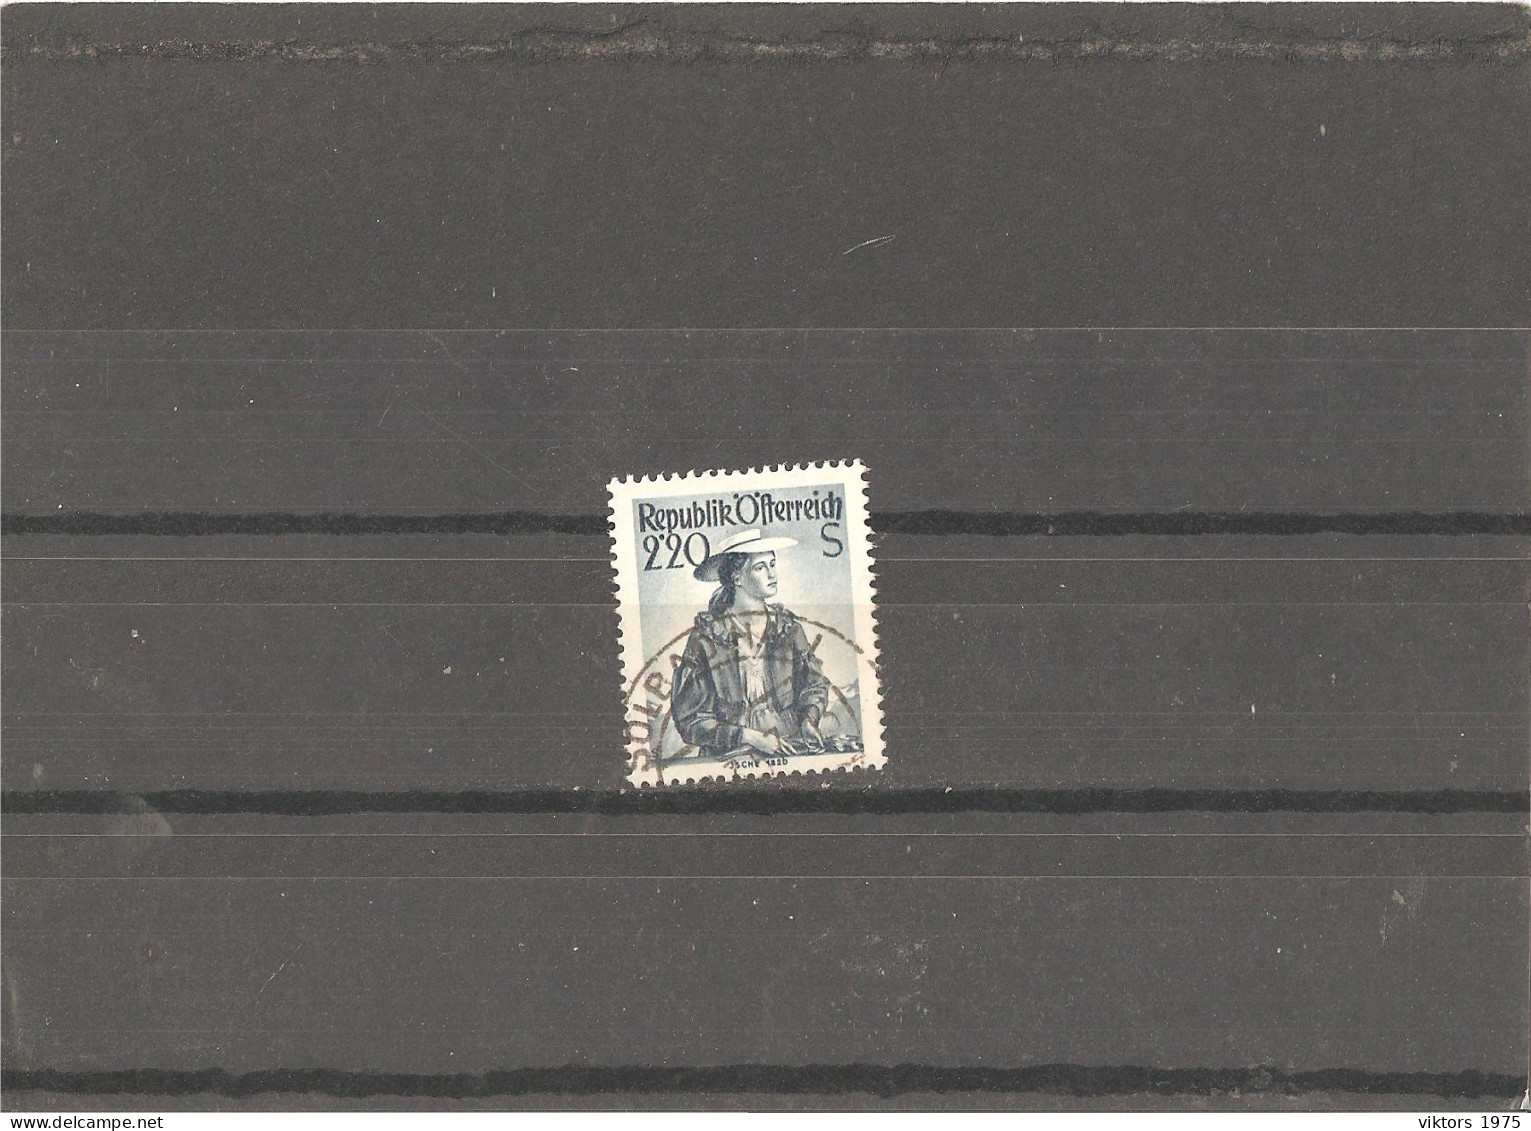 Used Stamp Nr.978 In MICHEL Catalog - Used Stamps